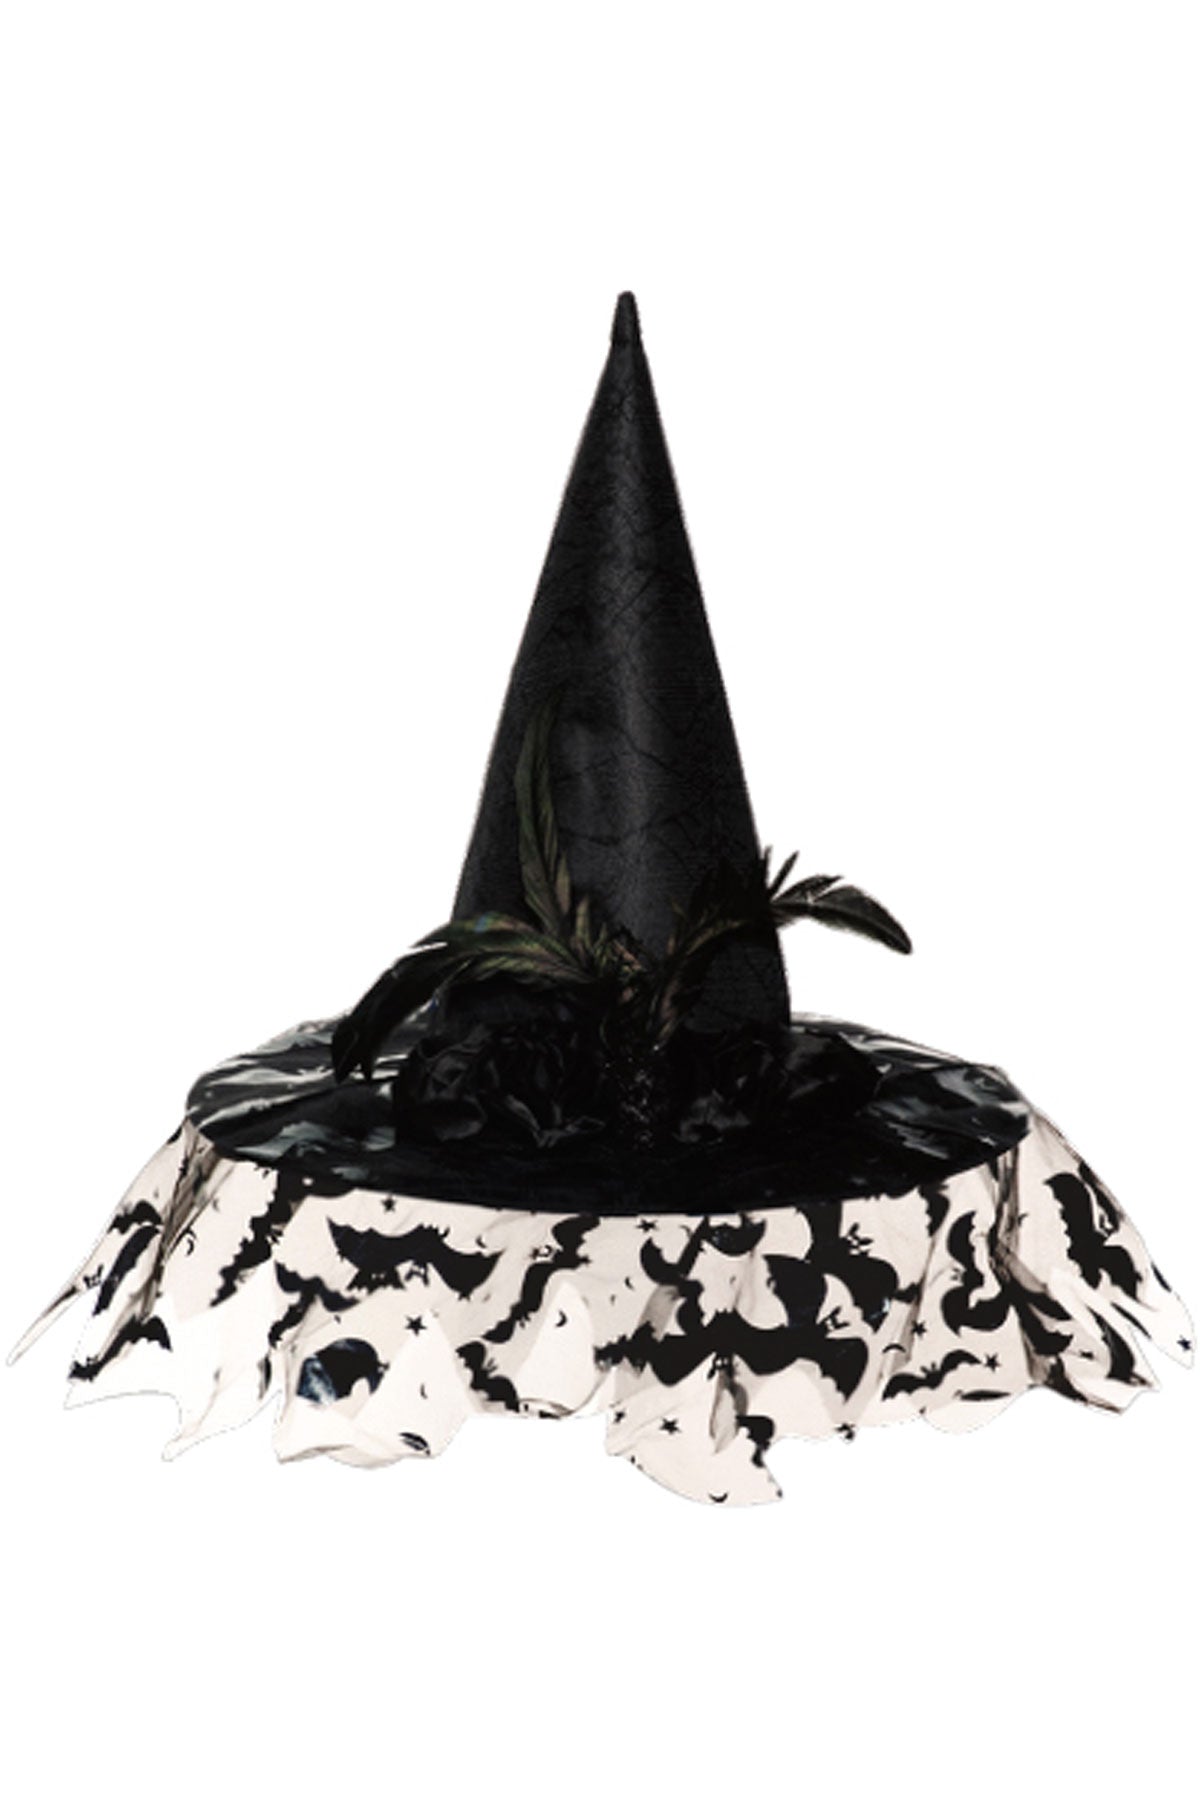 Deluxe Witch Hat With Veil-Black Underwraps  30788